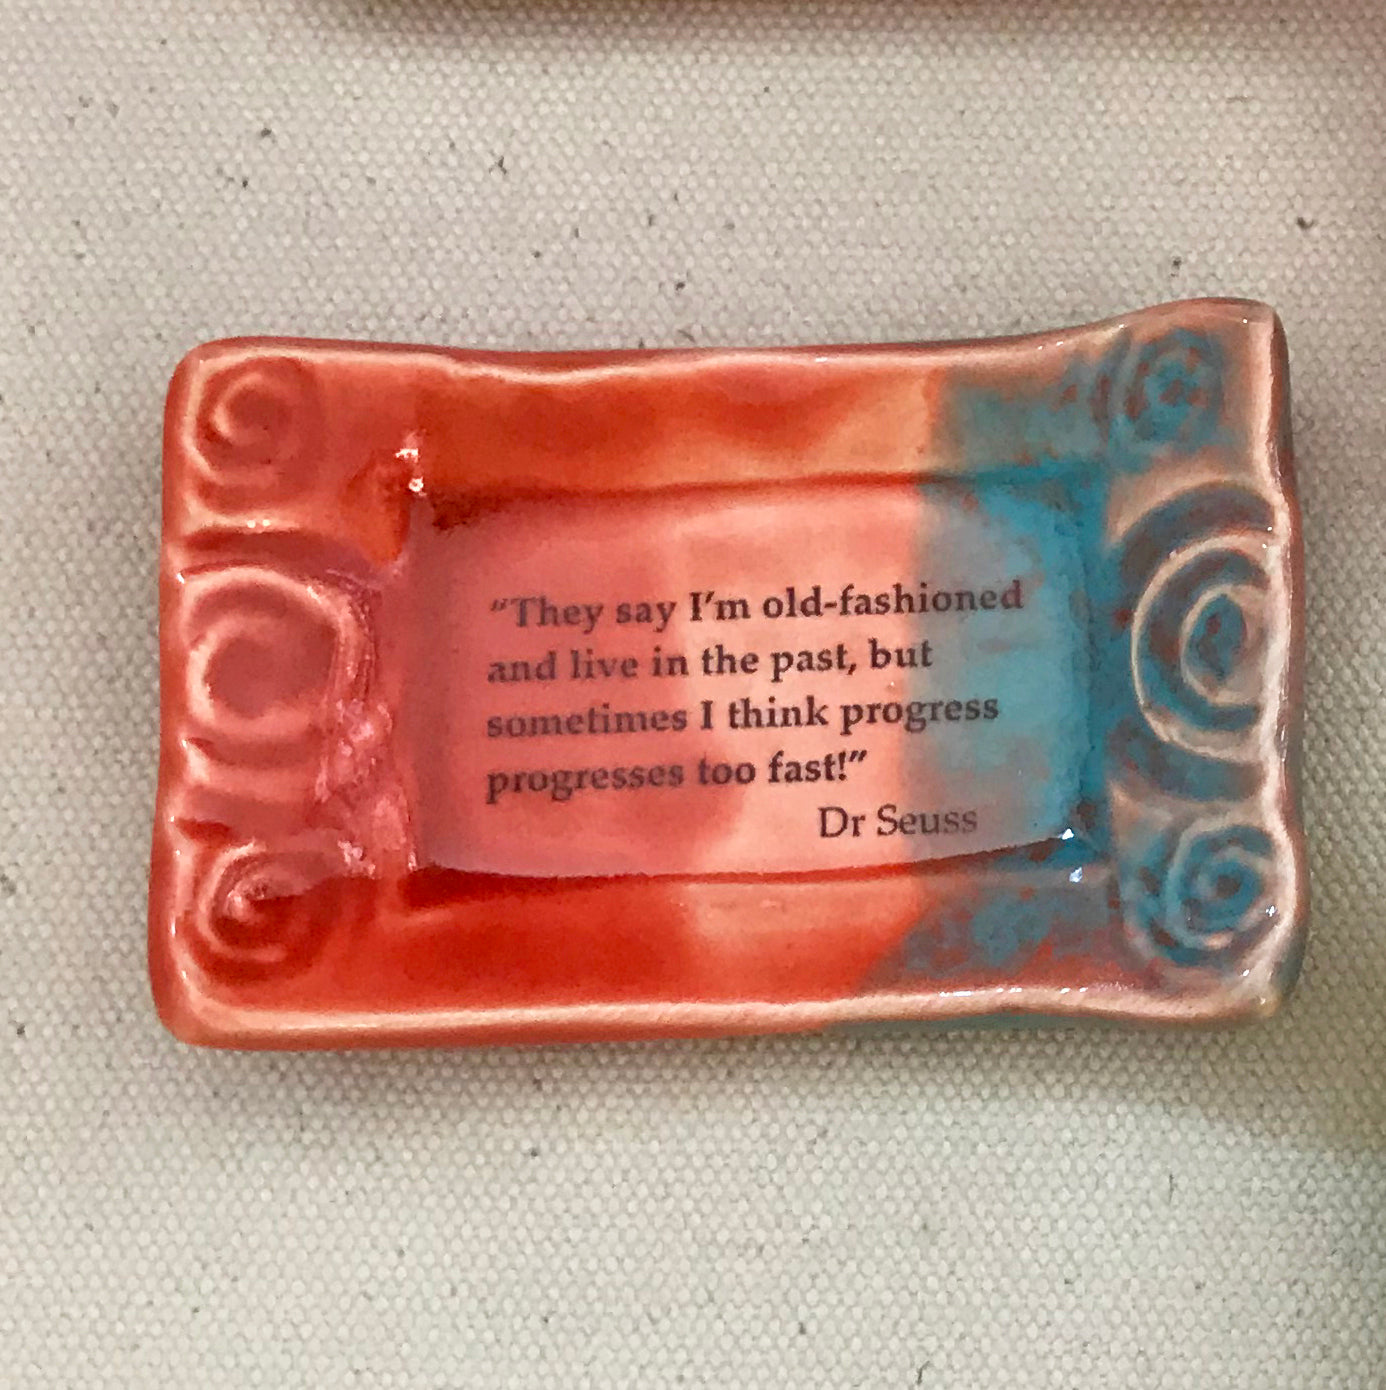 Handmade trinket dish with quote by Dr Seuss.